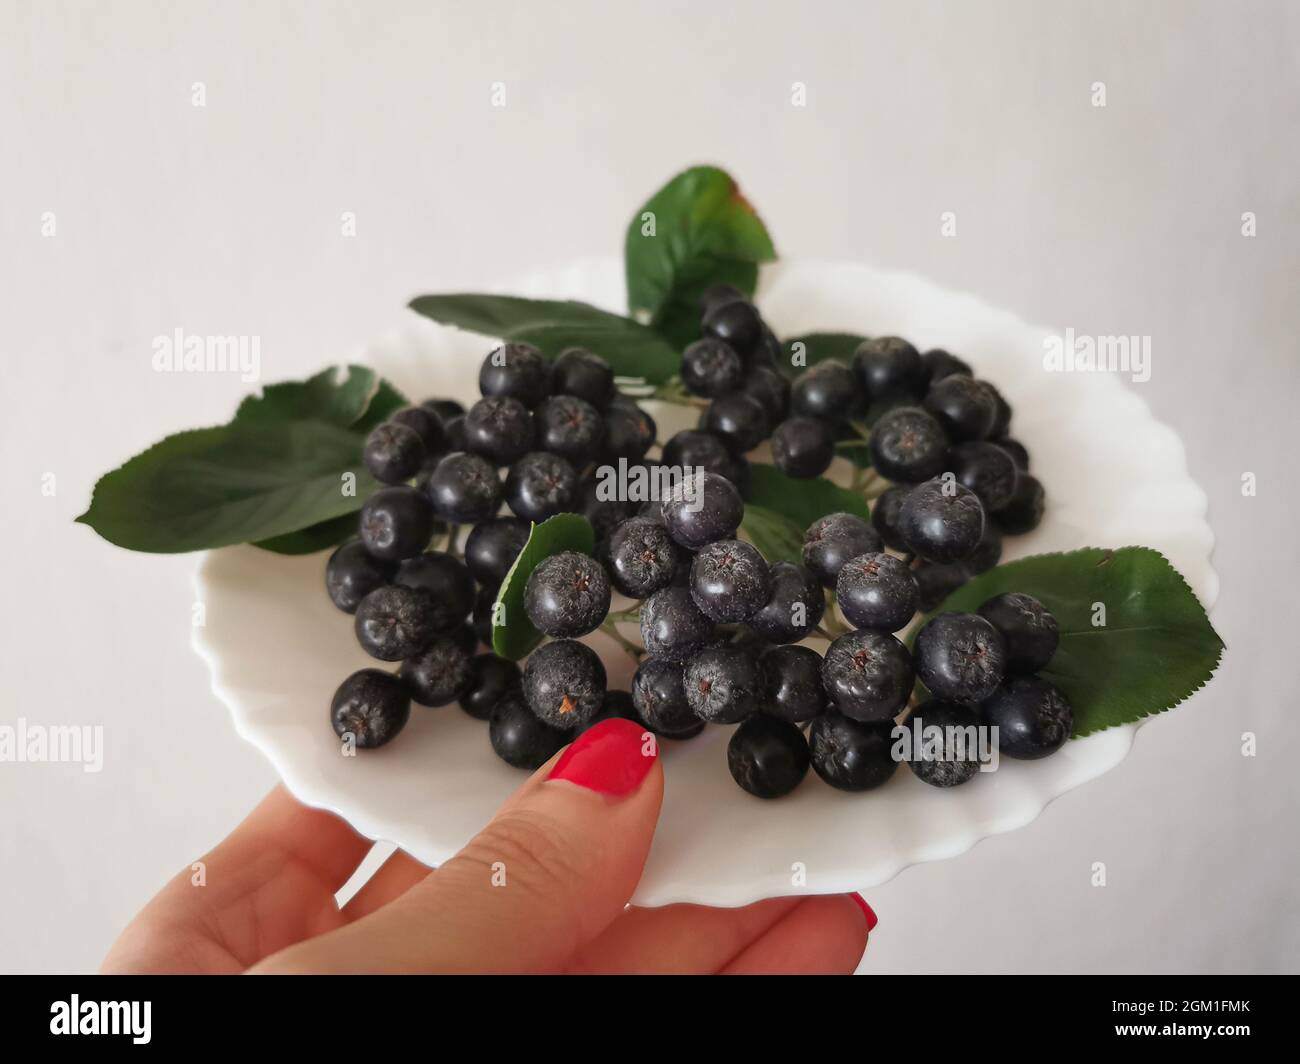 Black chokeberry (Aronia) berries with leaves on a white plate Stock Photo